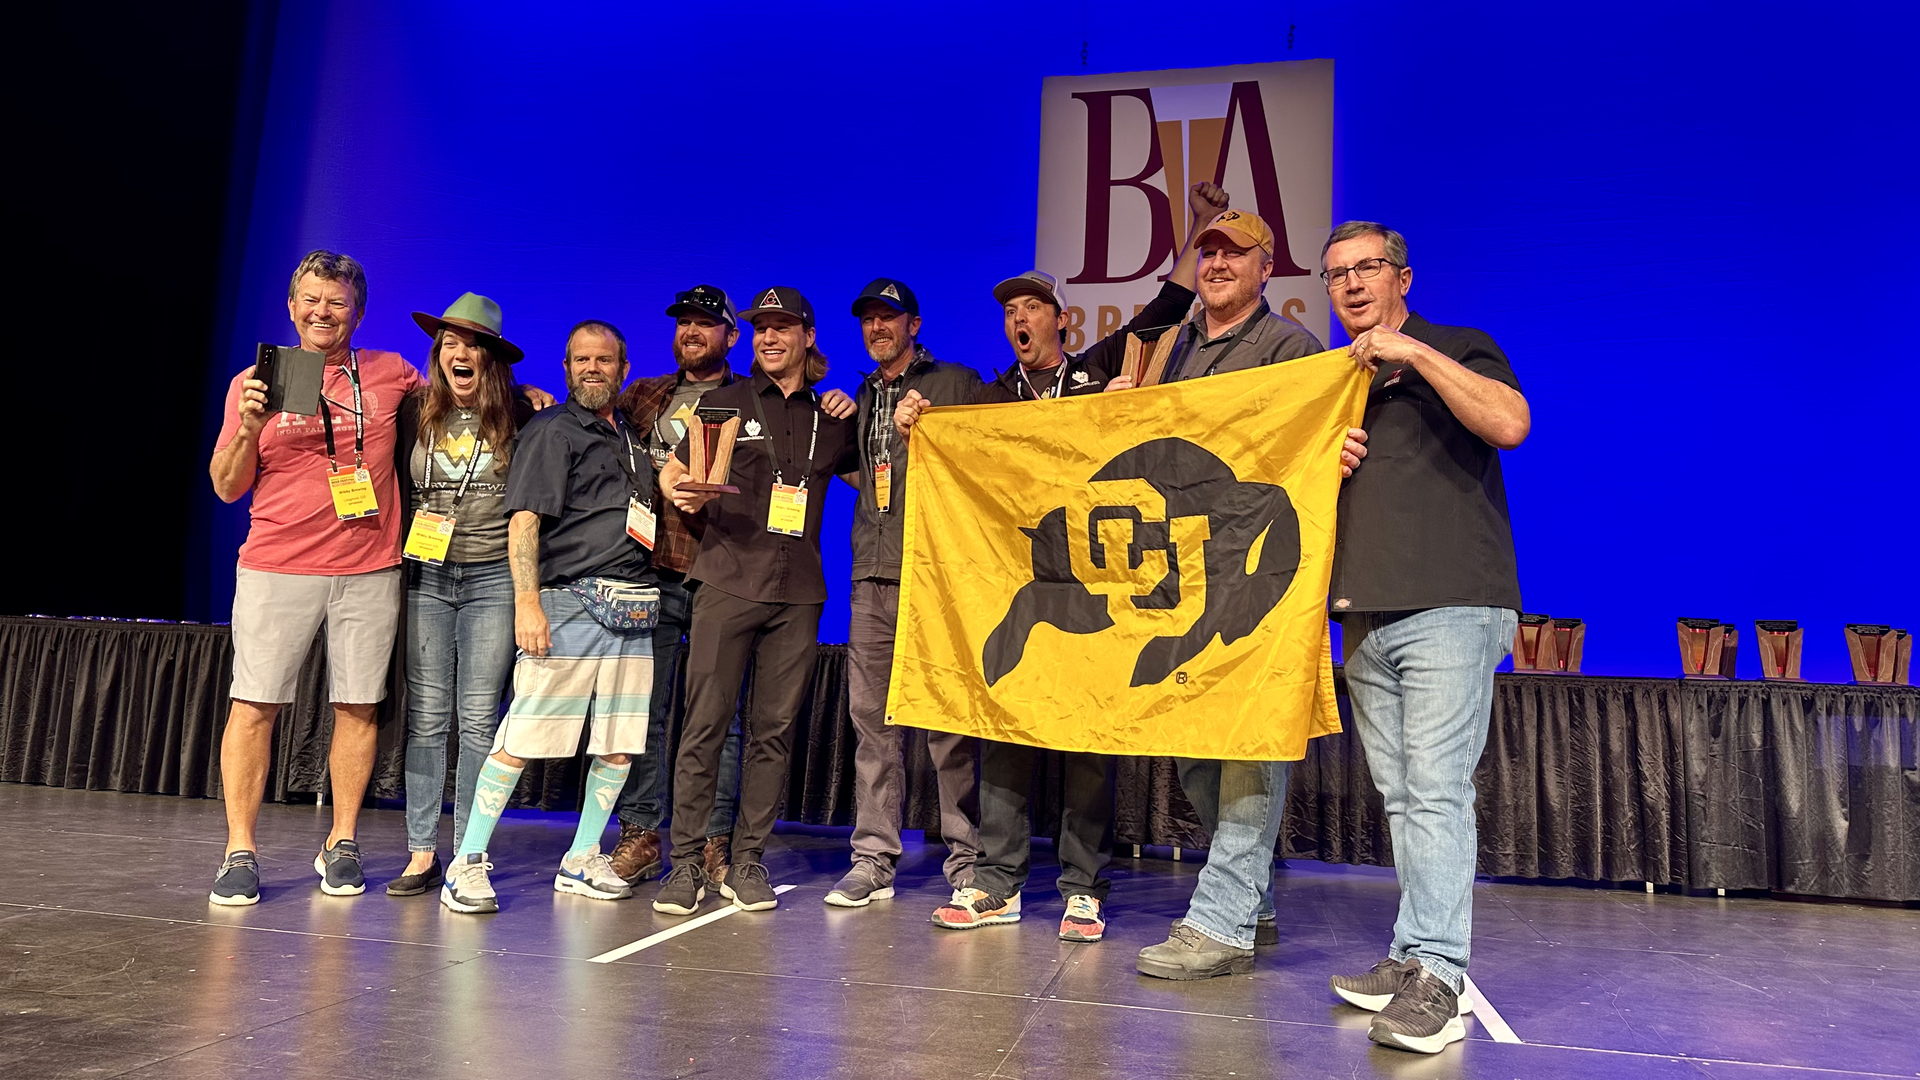 Wibby Brewing staff hold a University of Colorado flag as they accept their Great American Beer Festival trophy on Saturday in Denver. Photo: John Frank/Axios